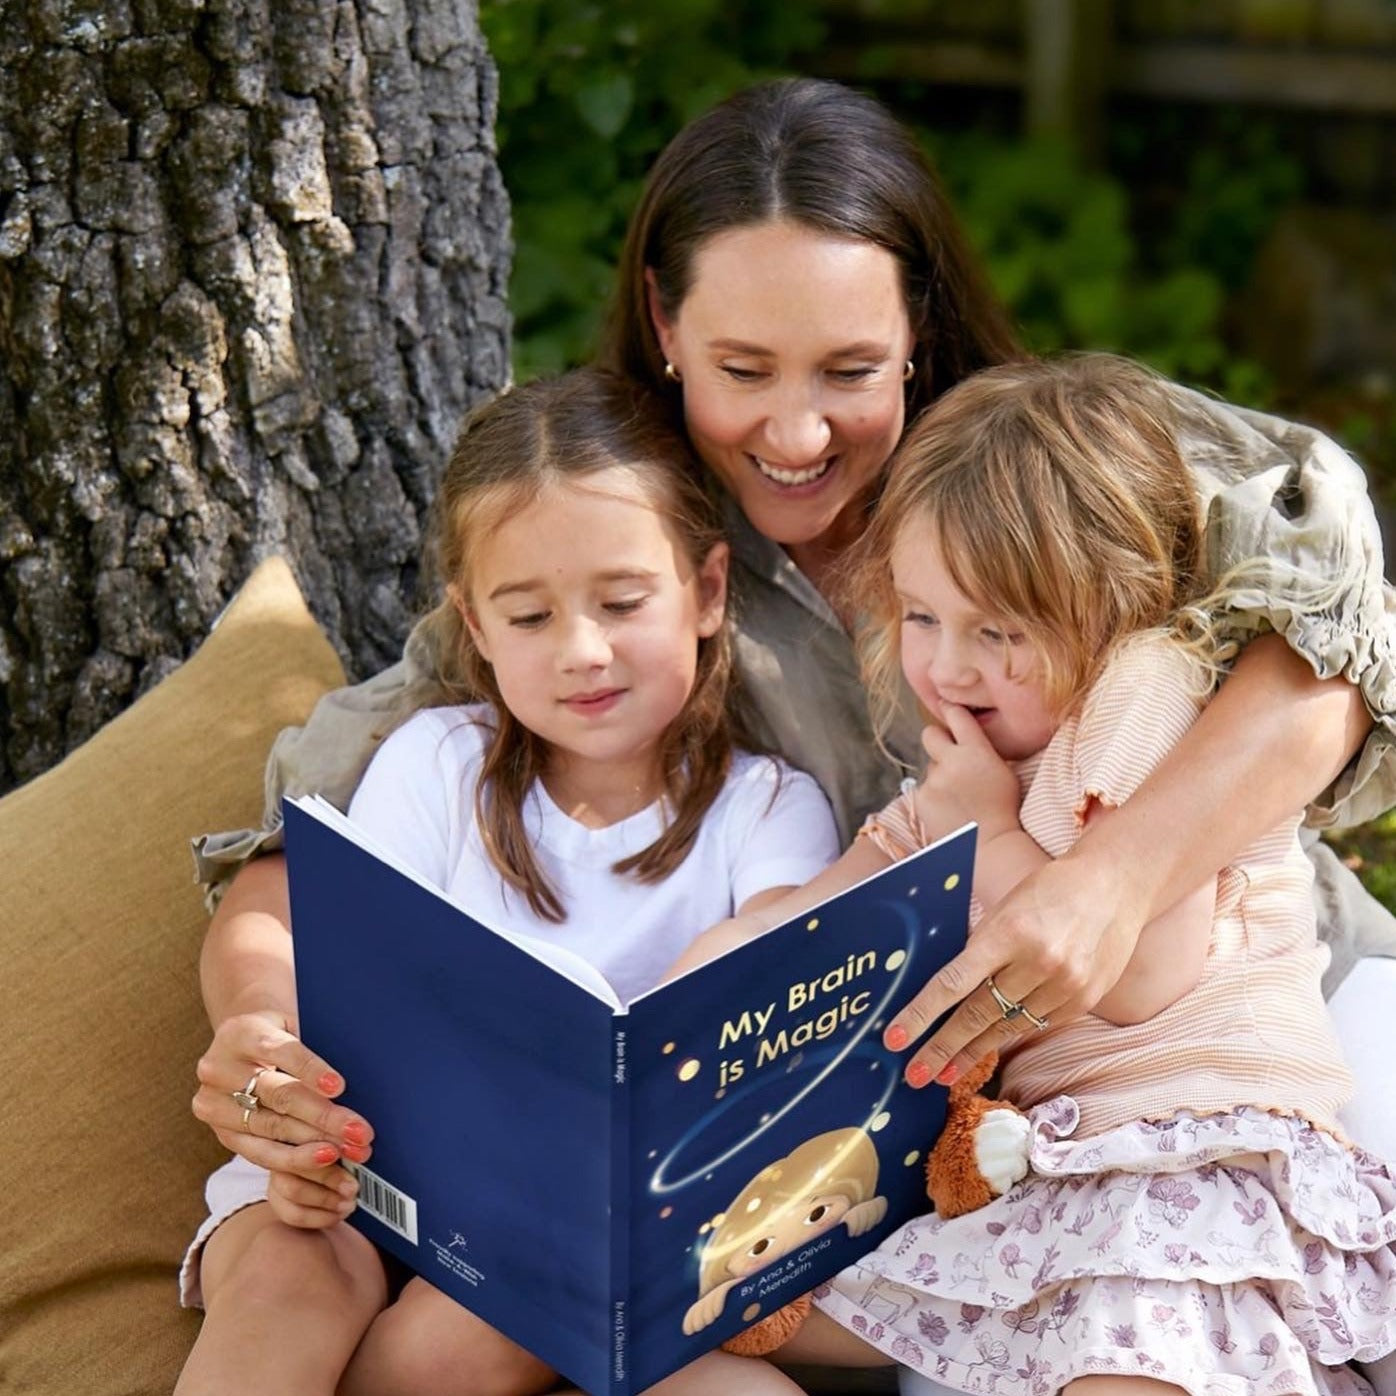 Woman reading a book called "My Brain is Magic" to two children.